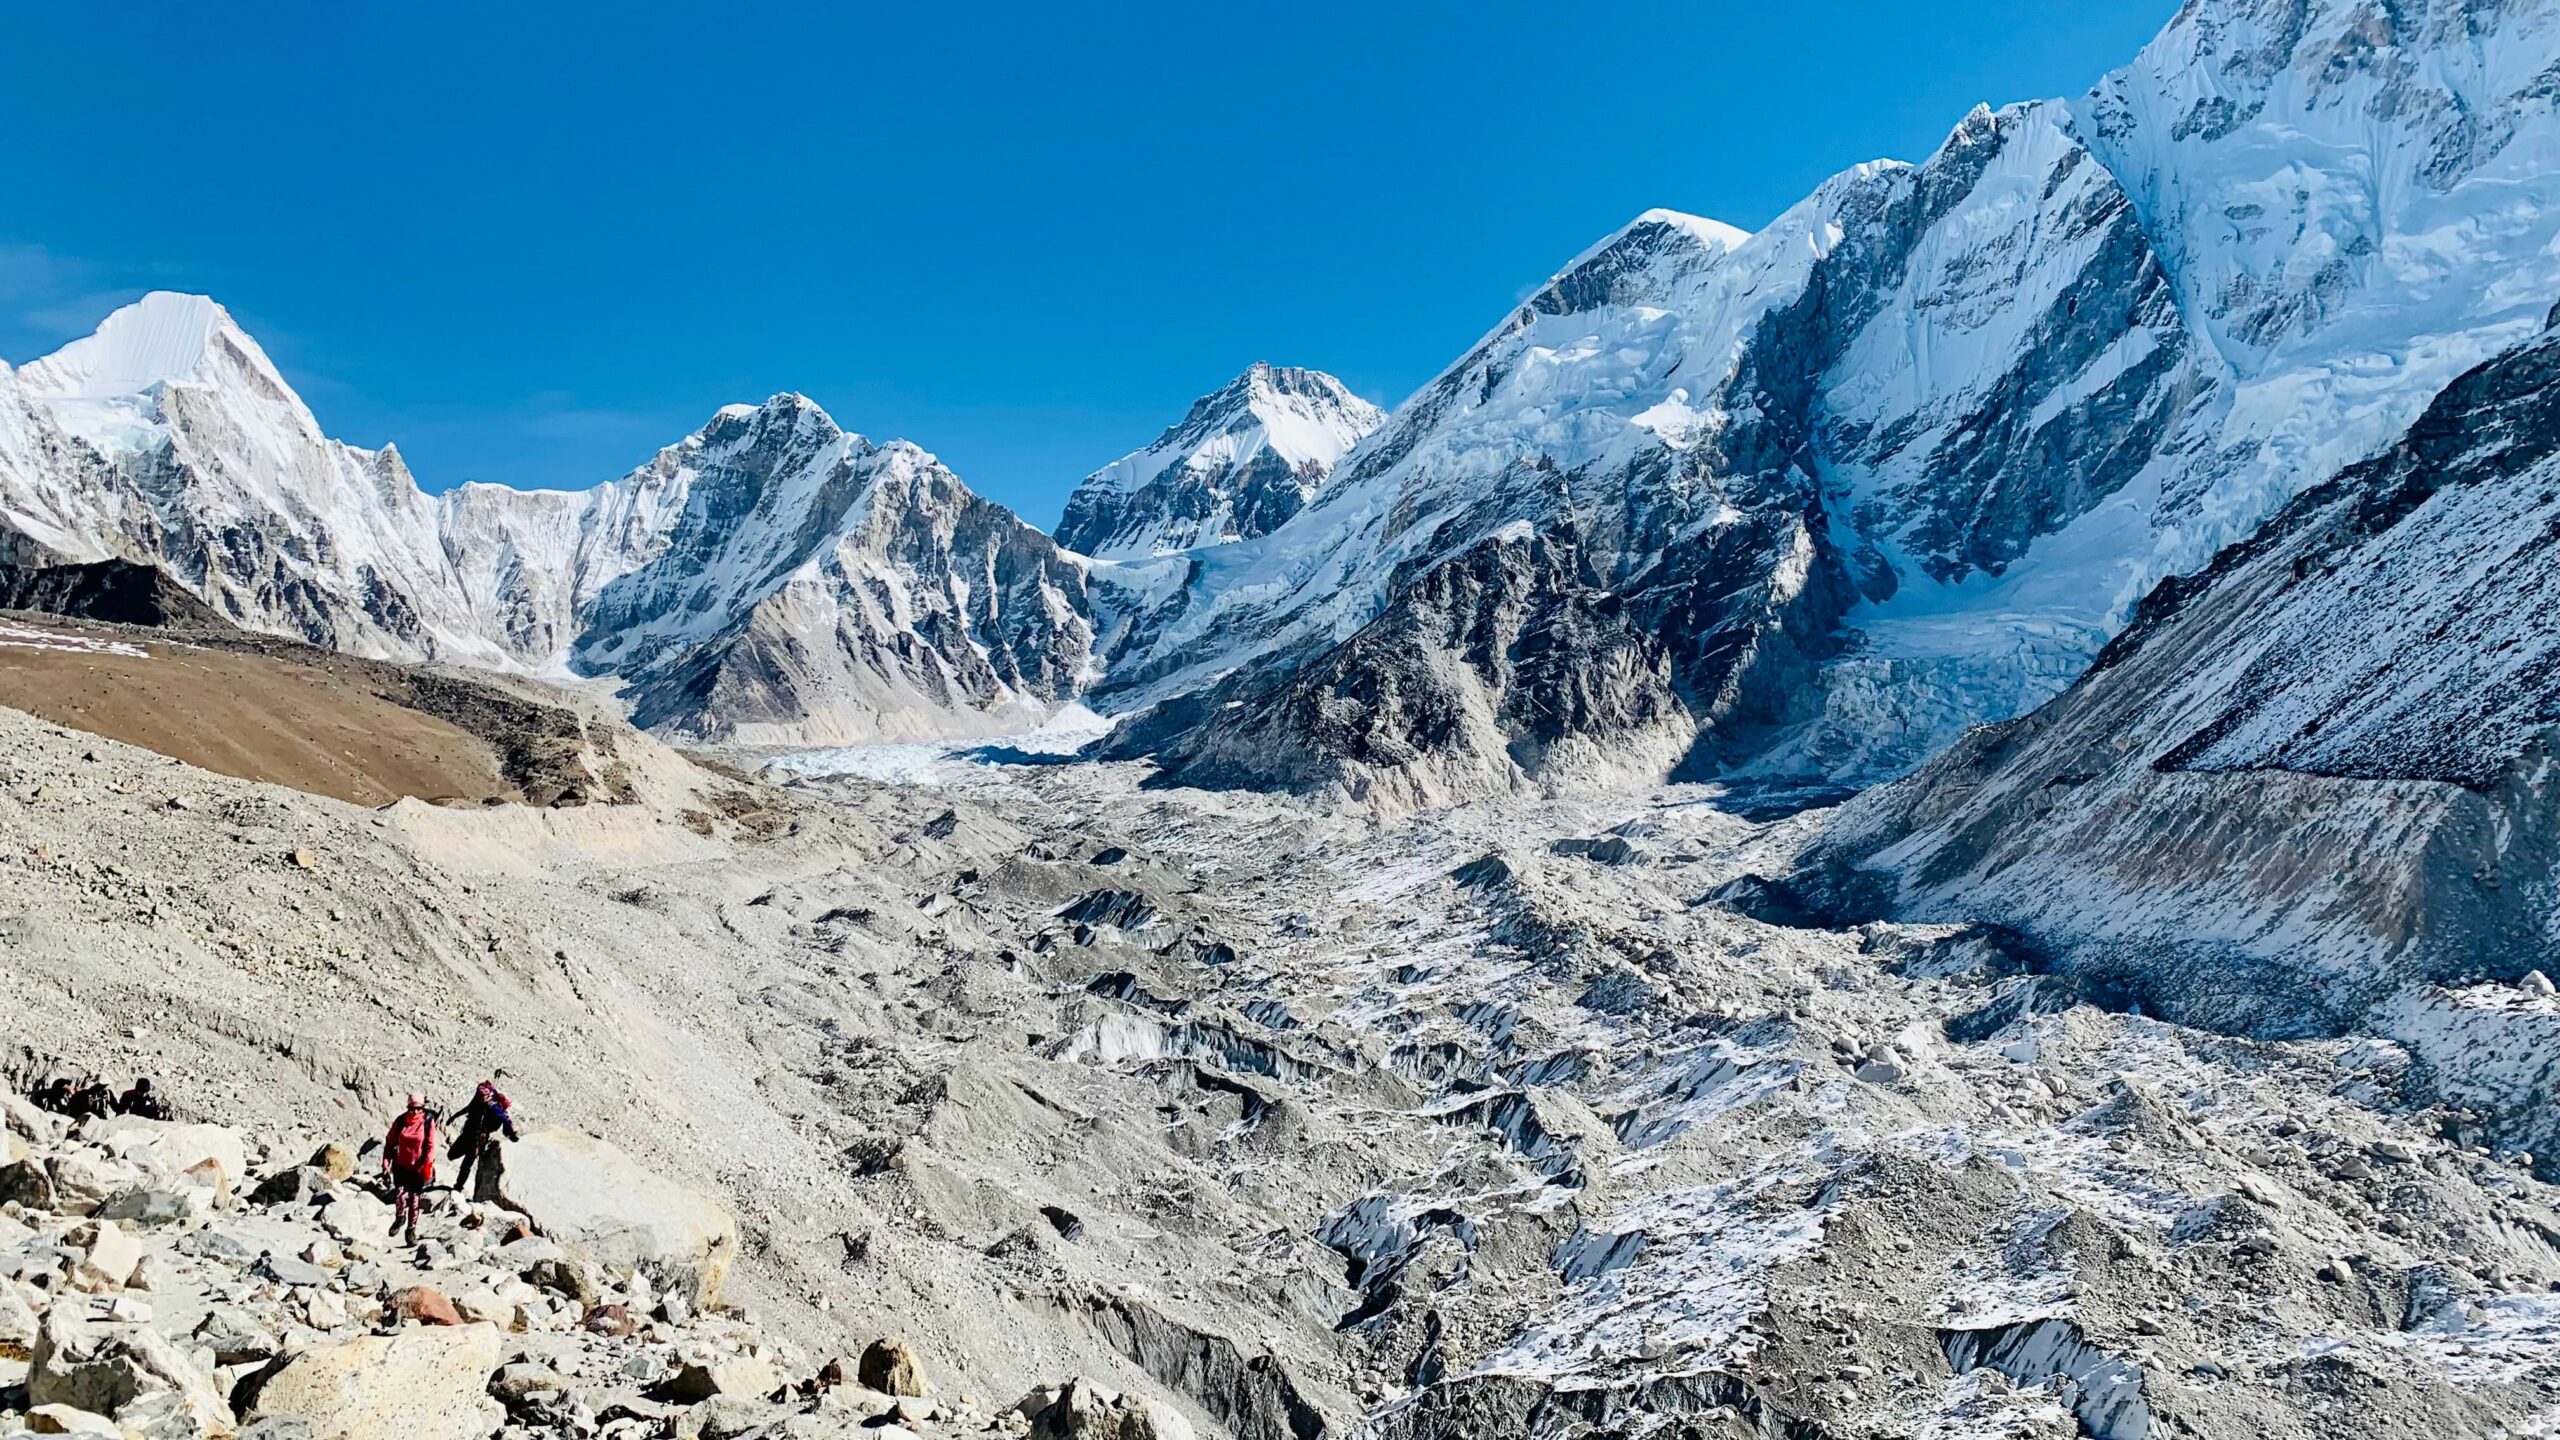 Trekking in Nepal: The 5 Best Places to Explore on Your First Trip